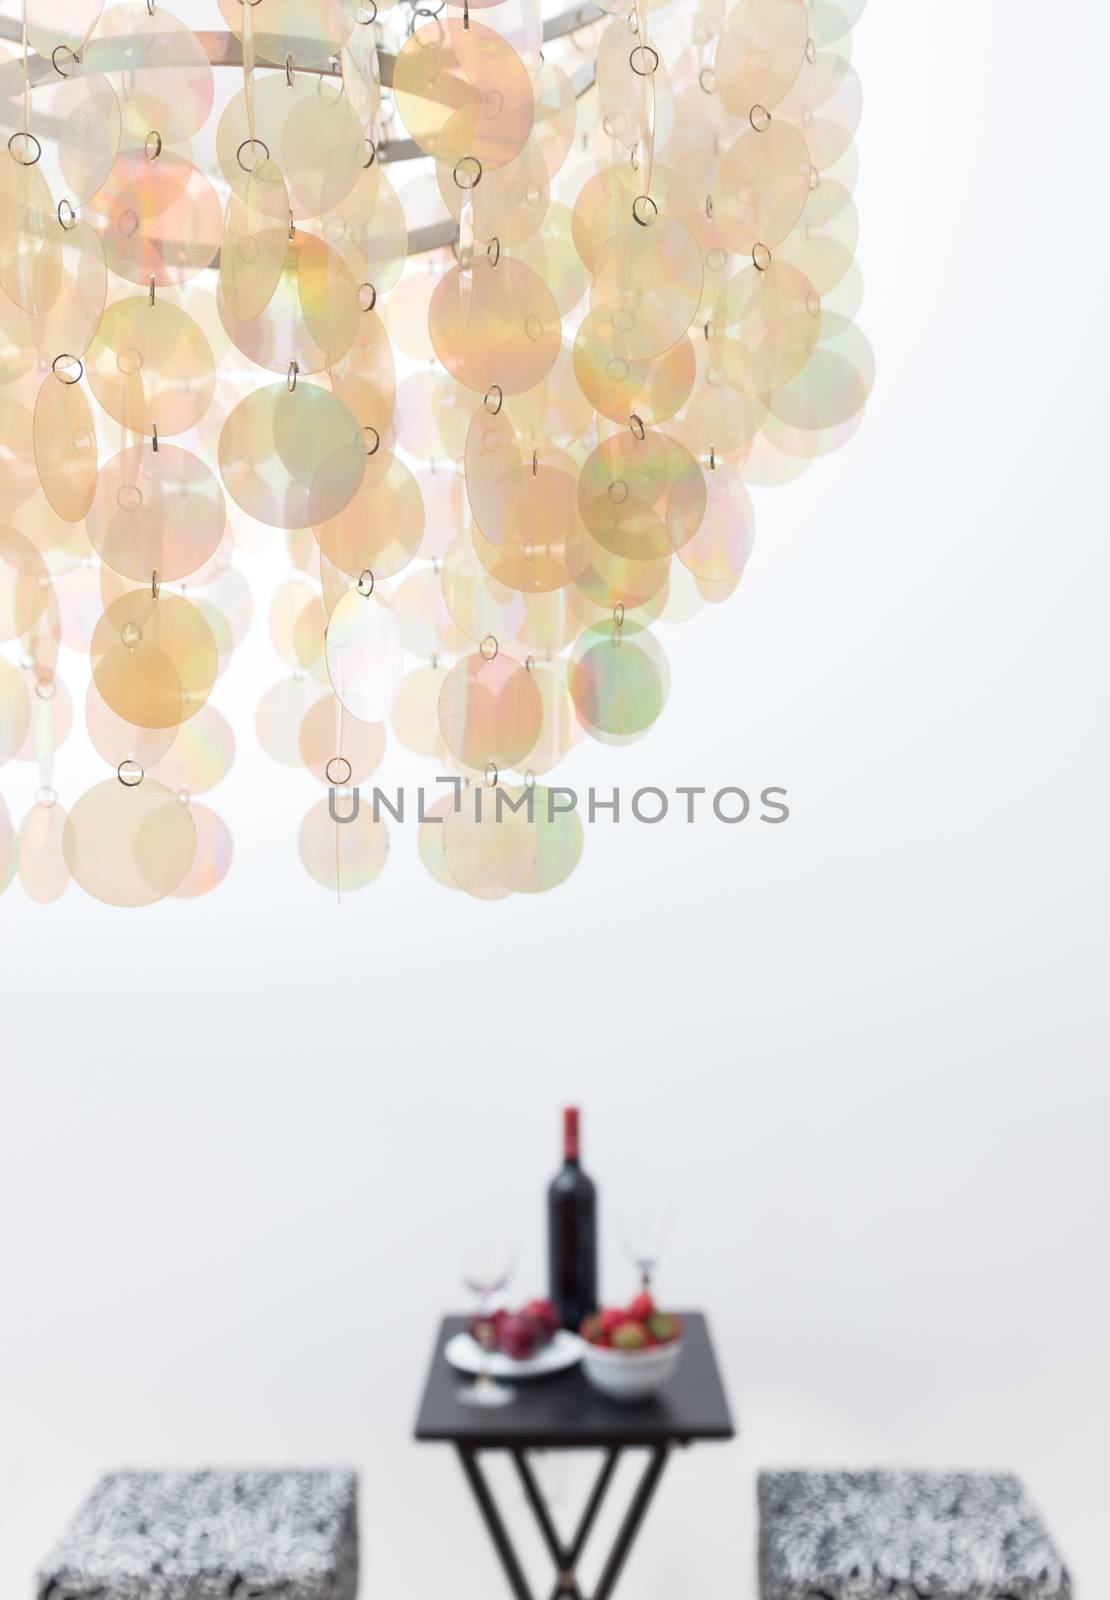 Bottle of red wine on a table, in a room decorated with beautiful chandelier. Focus on chandelier.